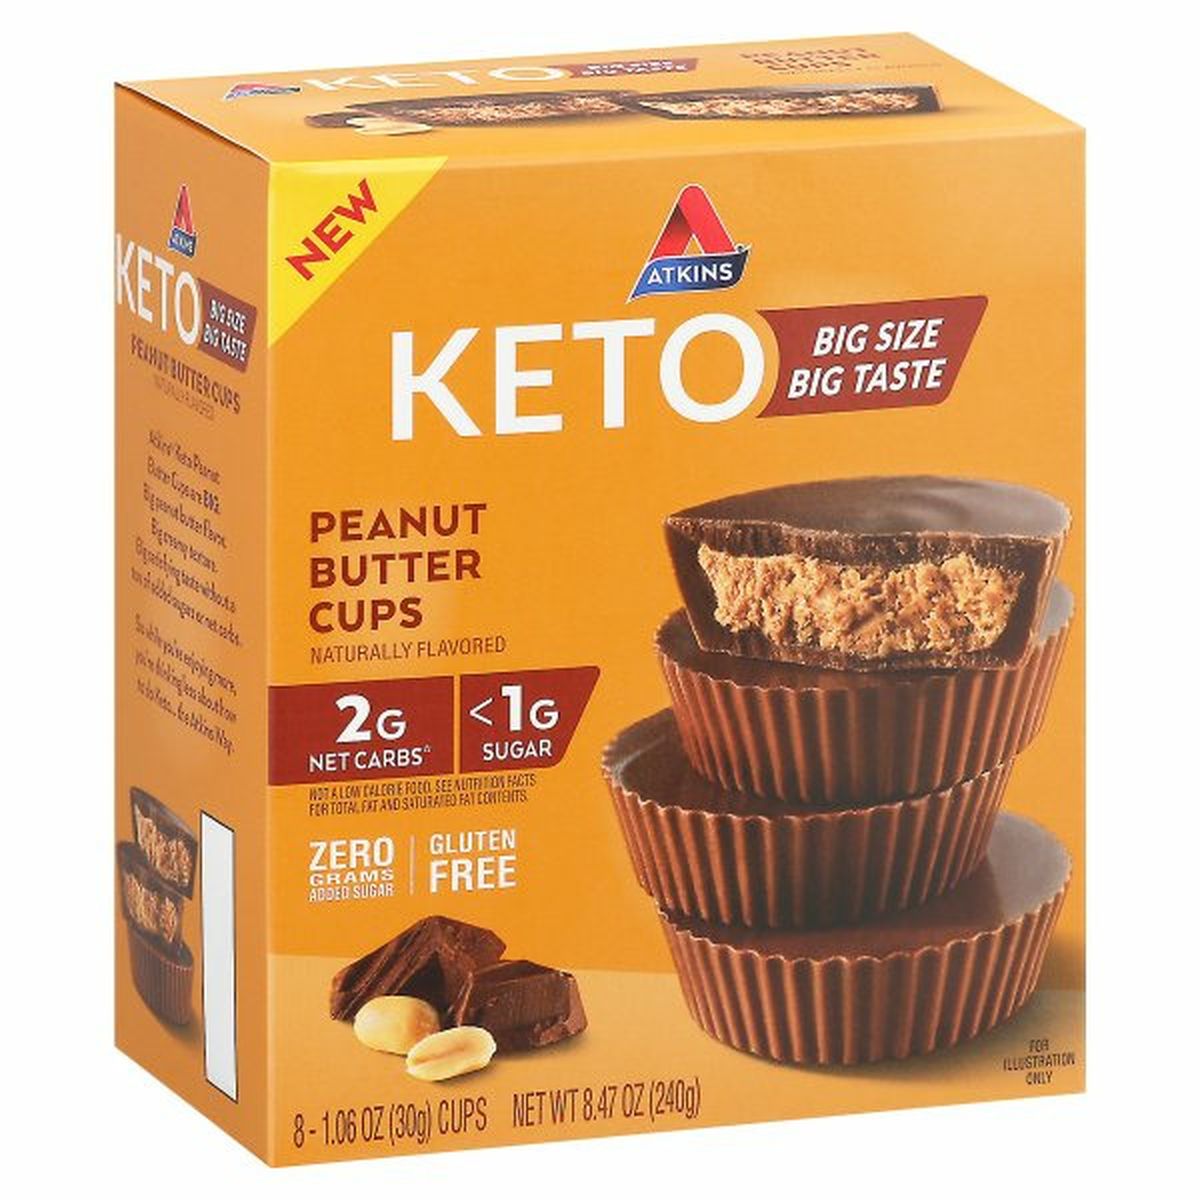 Calories in Atkins Peanut Butter Cups, Keto, Big Size